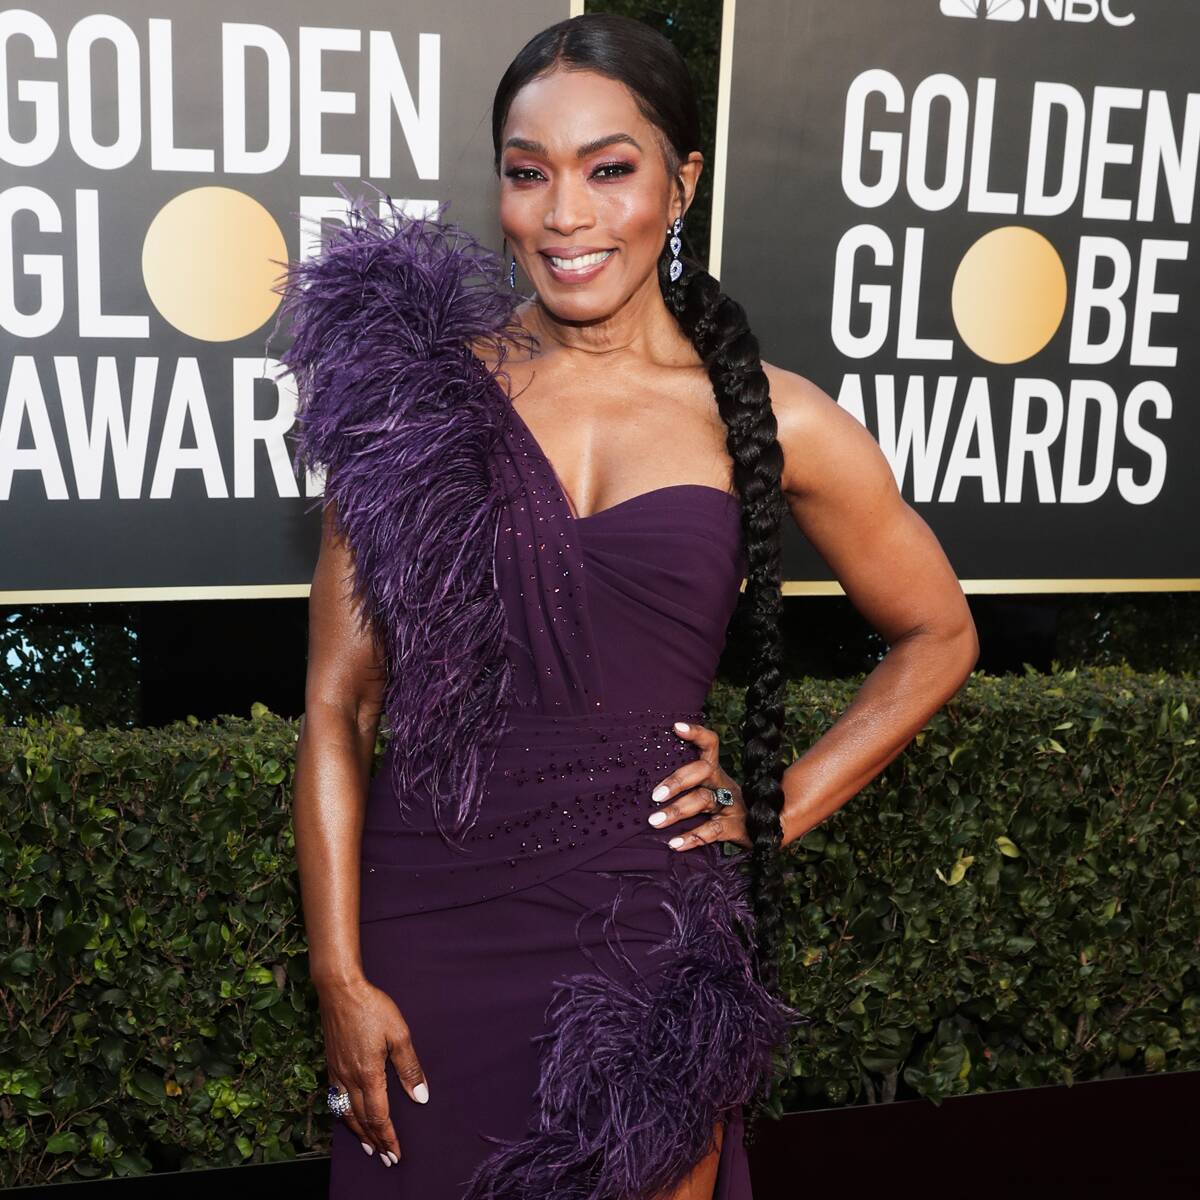 Angela Bassett Brings the Glamour in a Royal Purple Gown at the 2021 Golden Globe